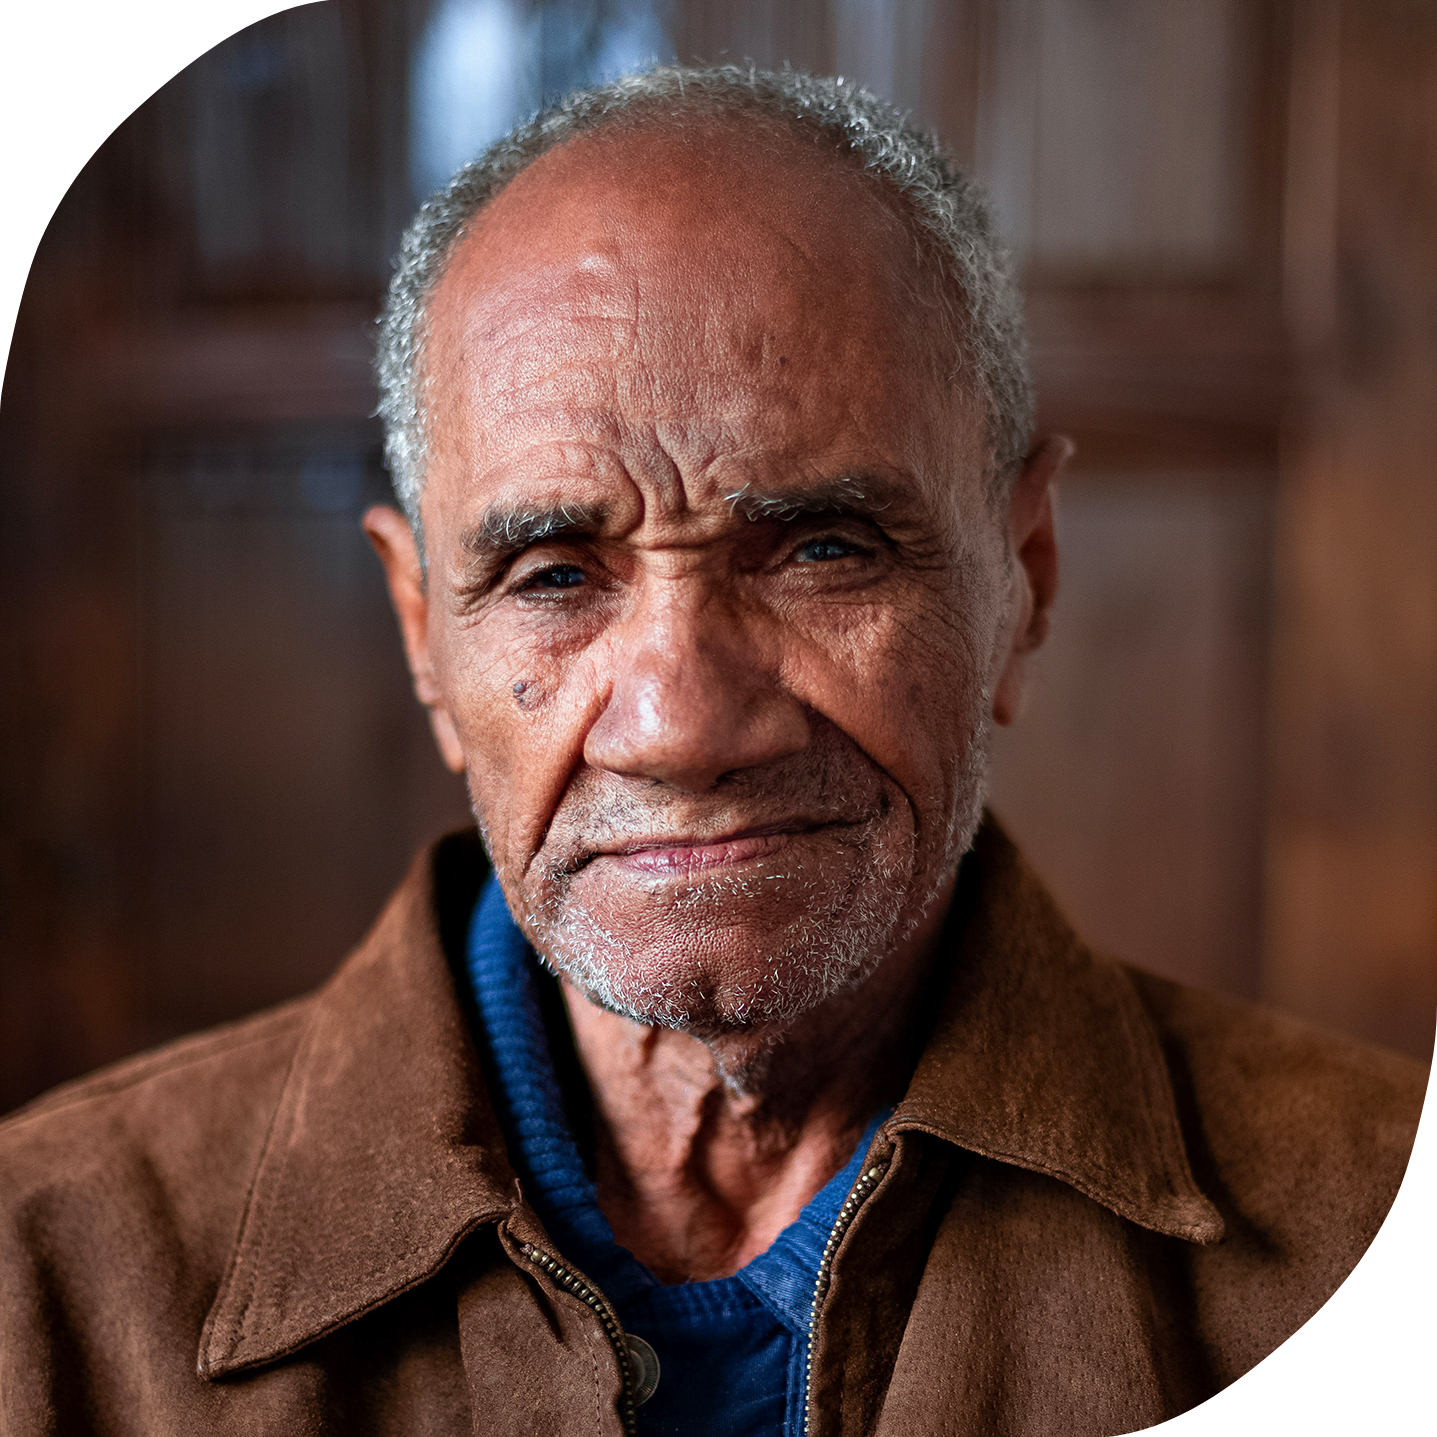 An older Black man with a weathered and wise face is looking into the camera.